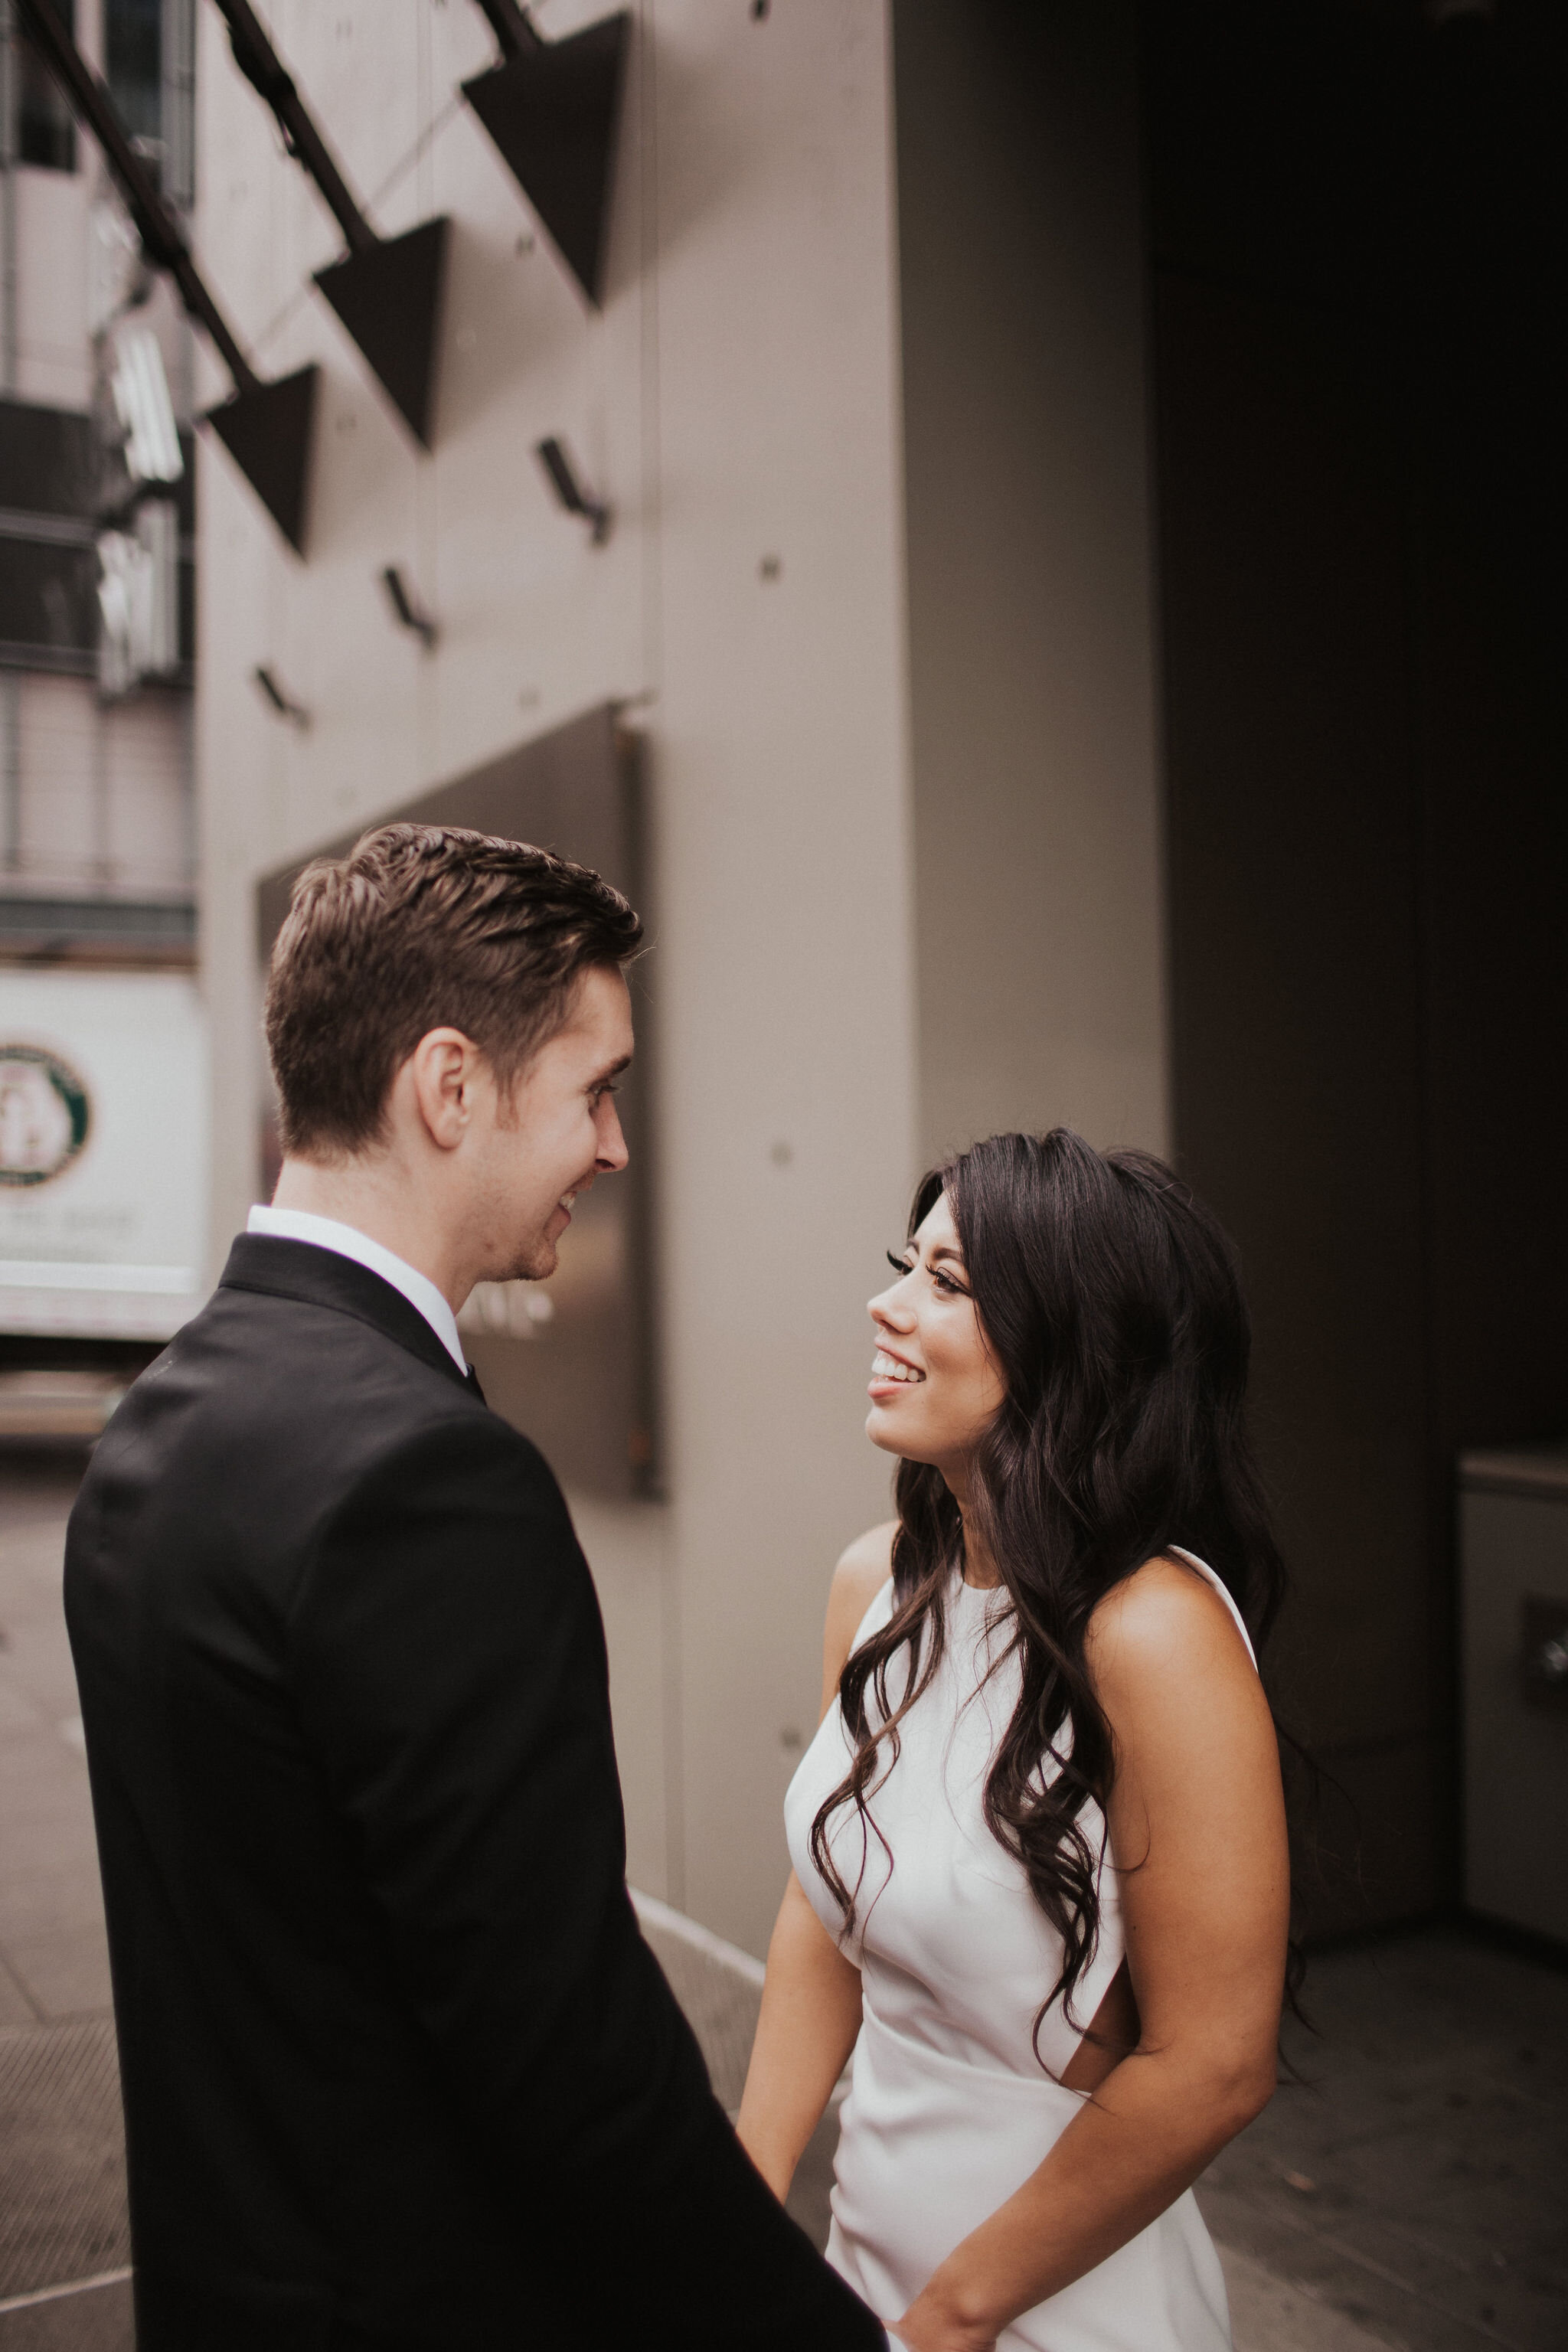 Sykes-couples-session-august-muse-images-seattle-wedding-photographer-within-sodo-four-seasons-133.jpg